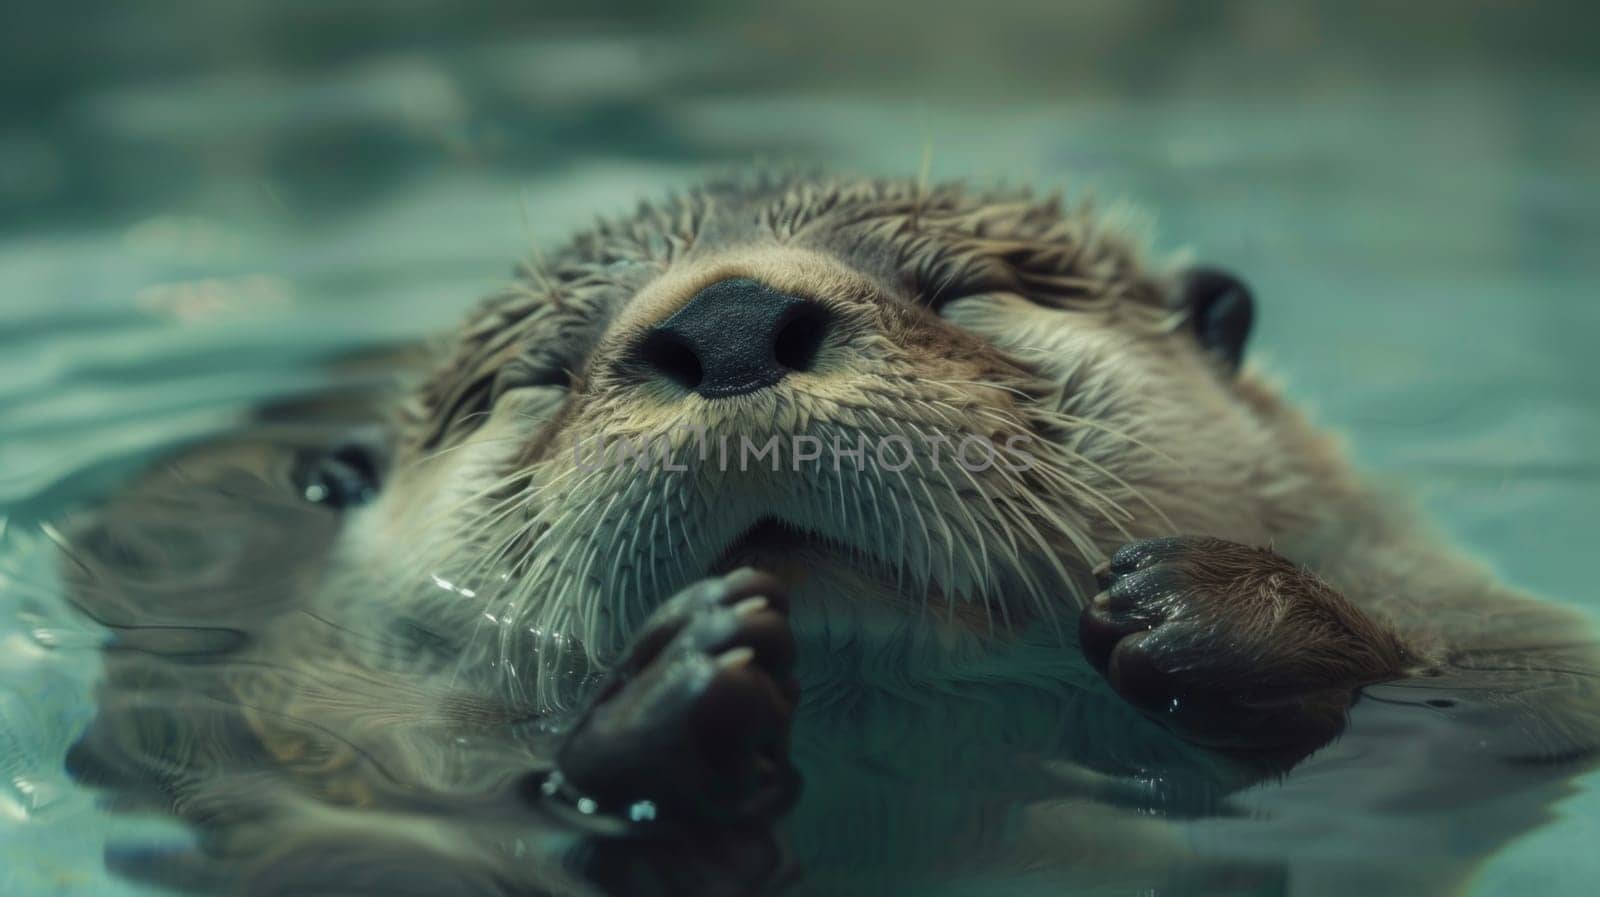 A close up of an otter swimming in the water with its eyes closed